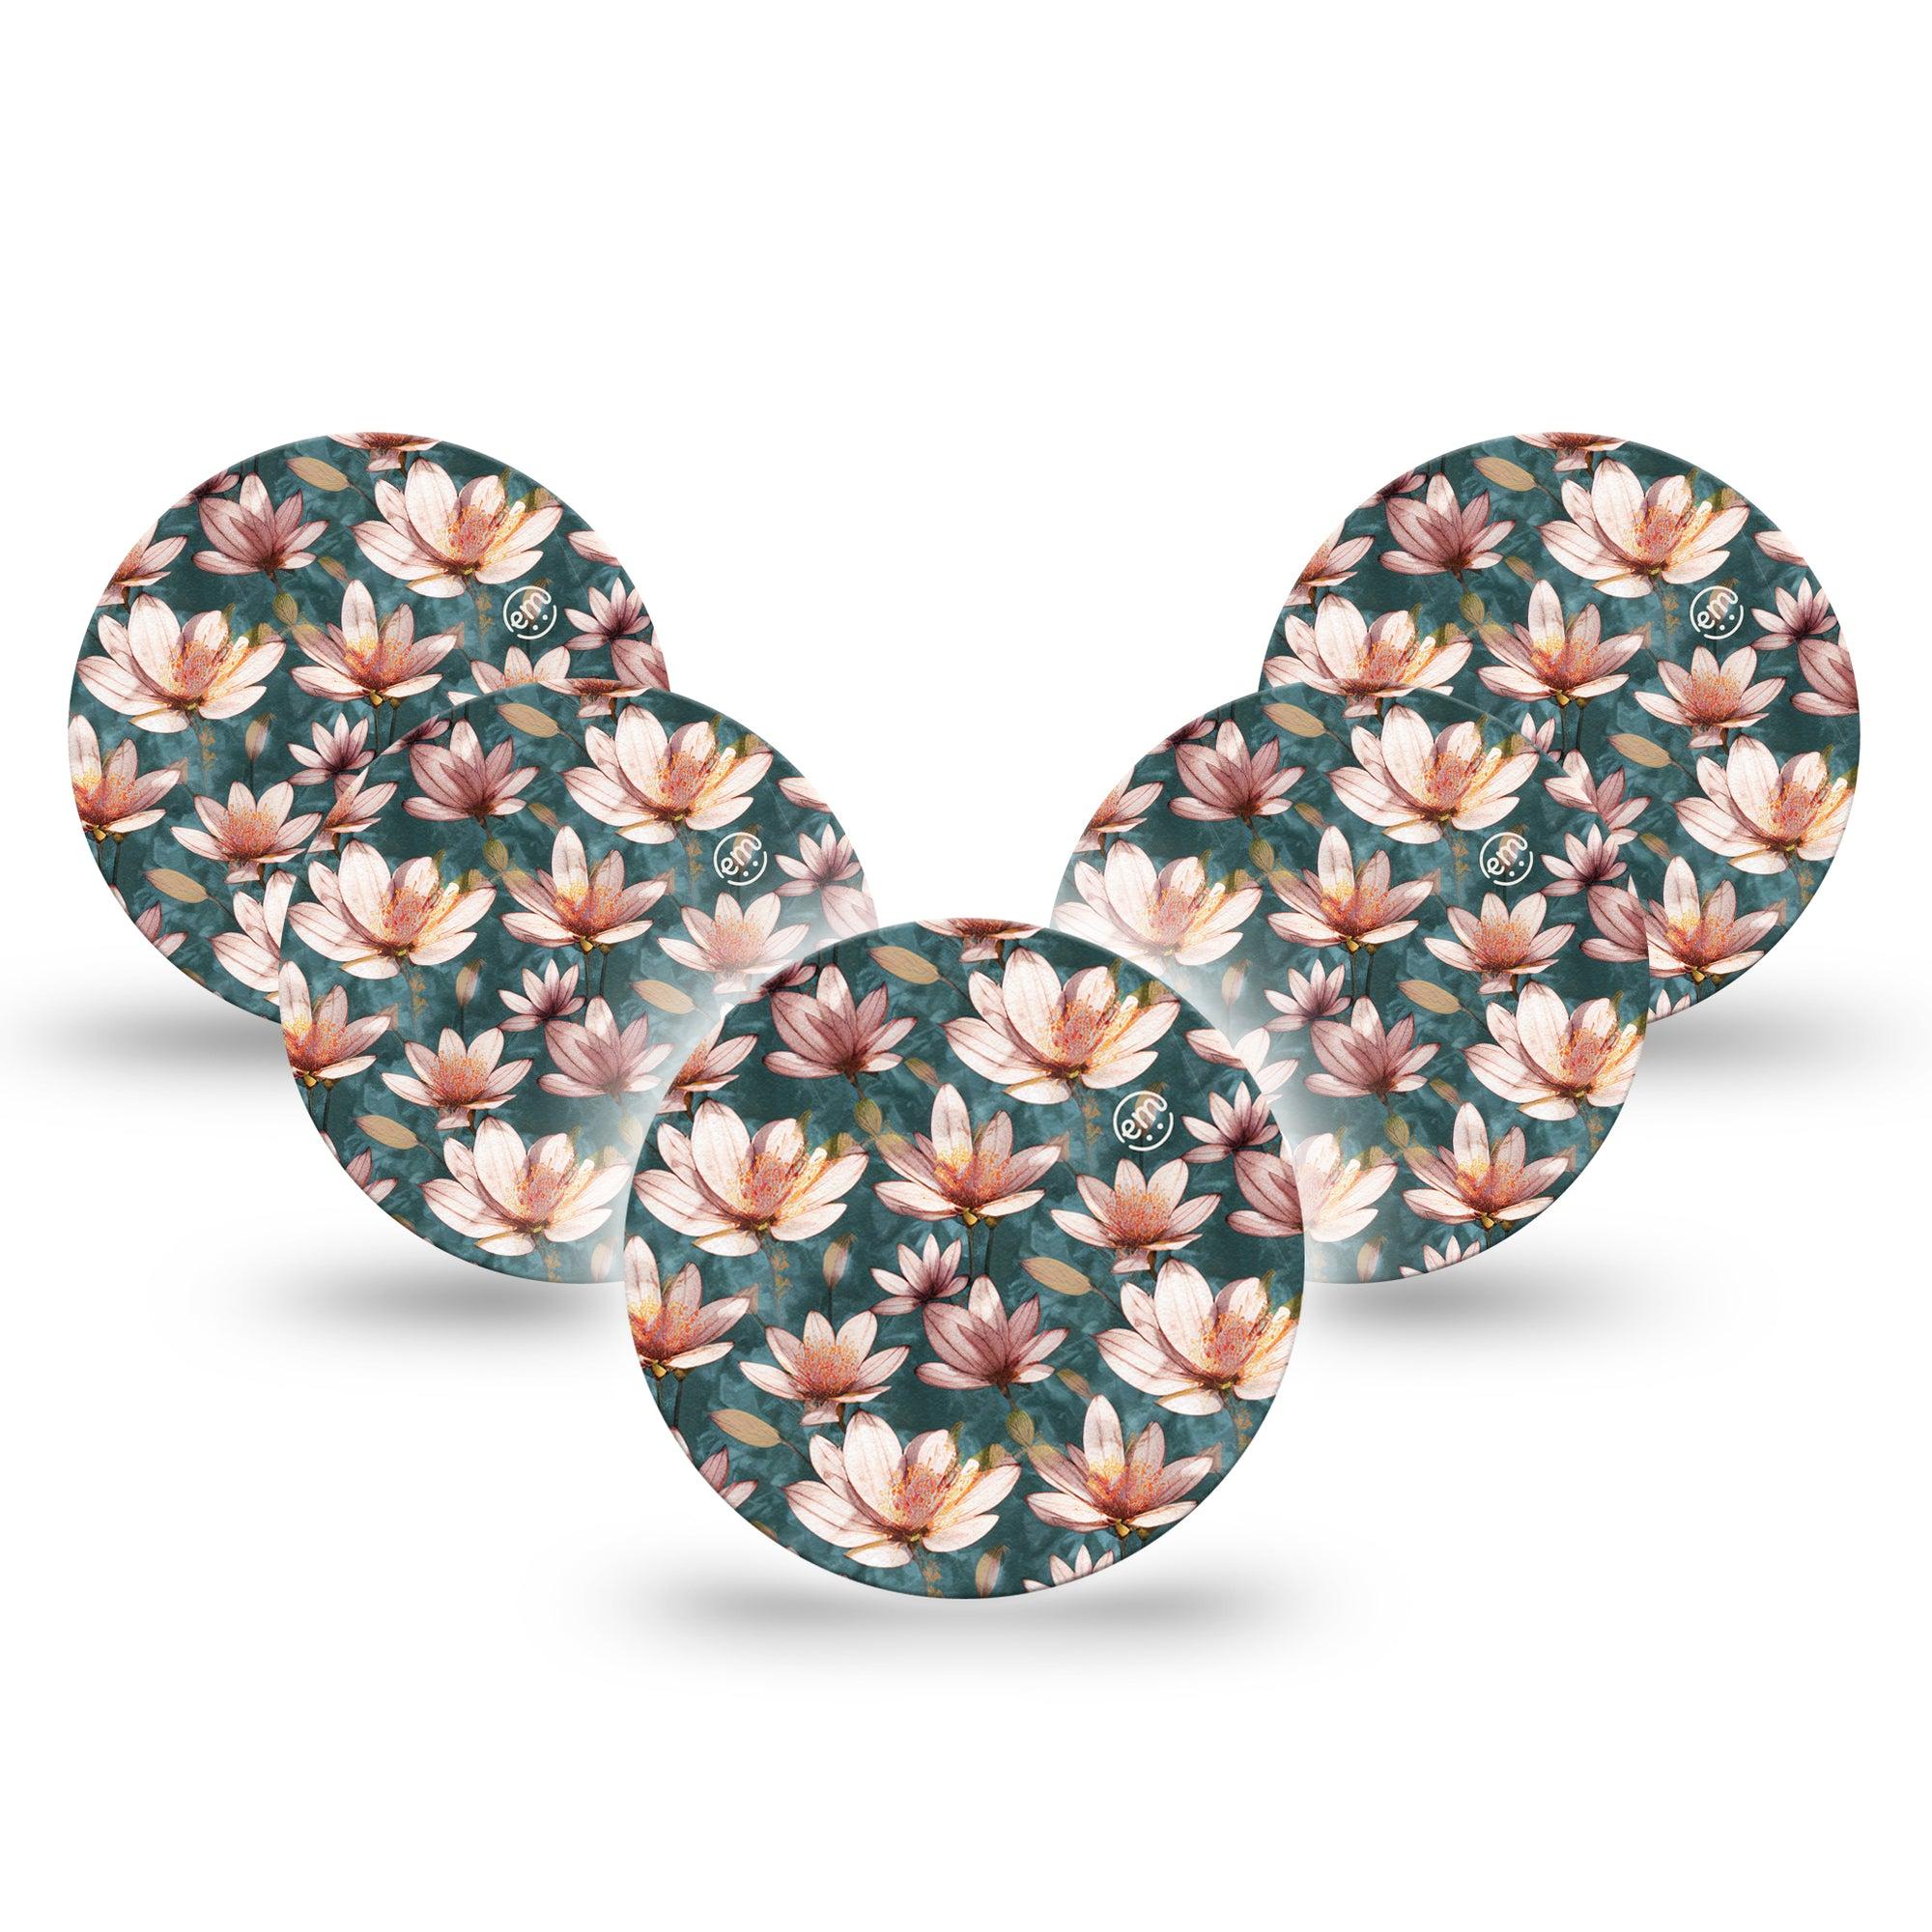 ExpressionMed Magnolia Libre 3 Overpatch, 5-Pack, Blooming Petals Themed, CGM Adhesive Tape Design